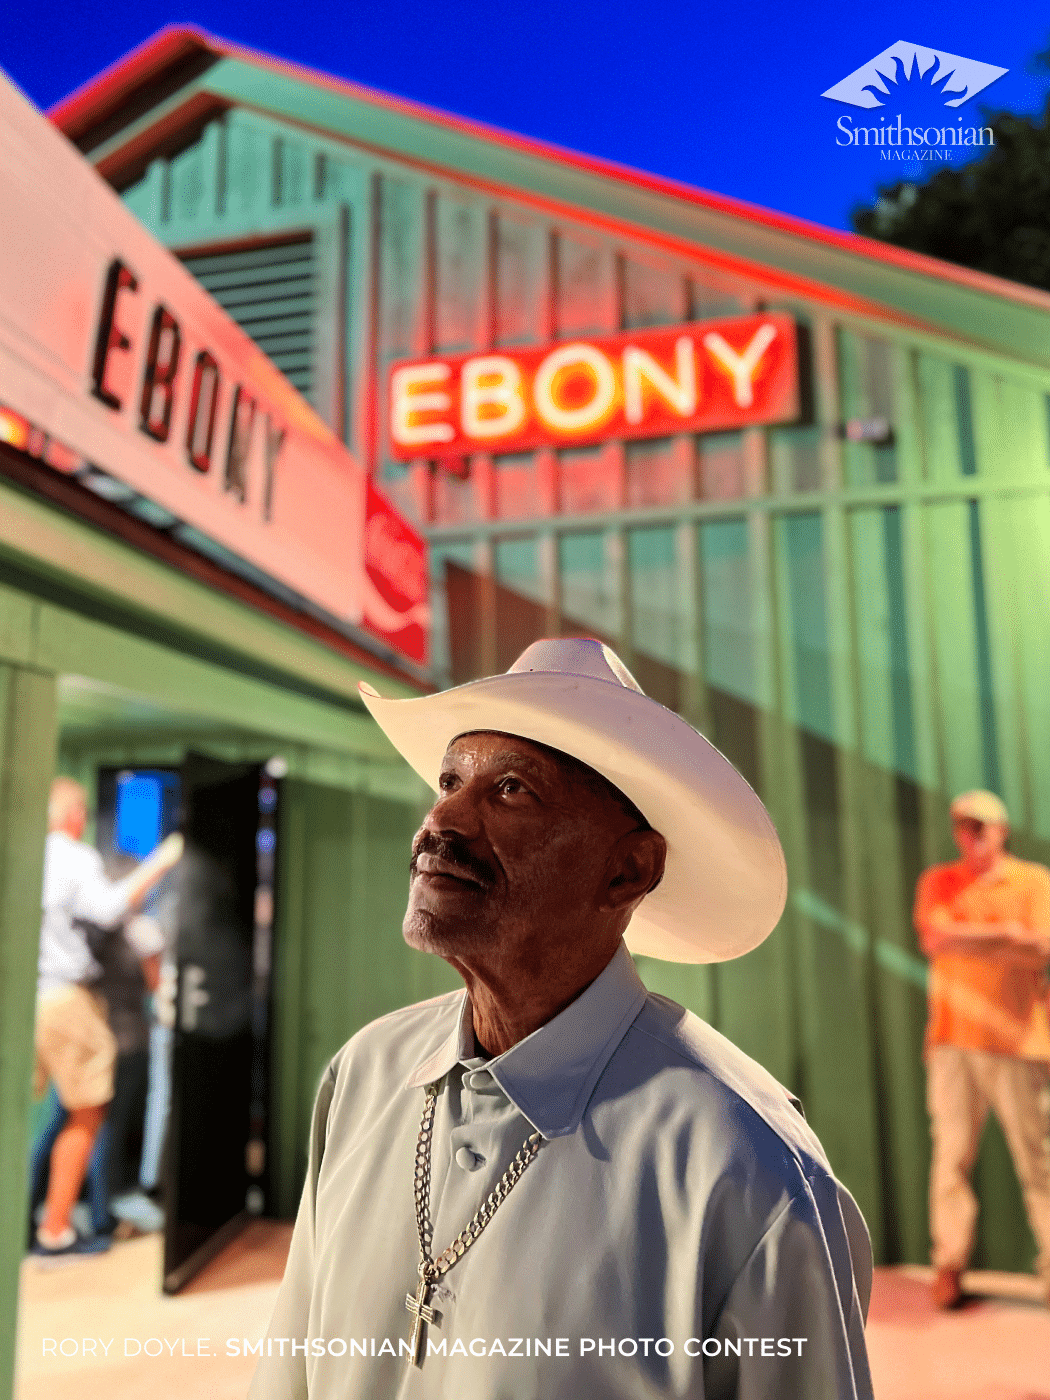 Archie Beckworth looks up at the recently remodeled Club Ebony in Indianola, Mississippi. 